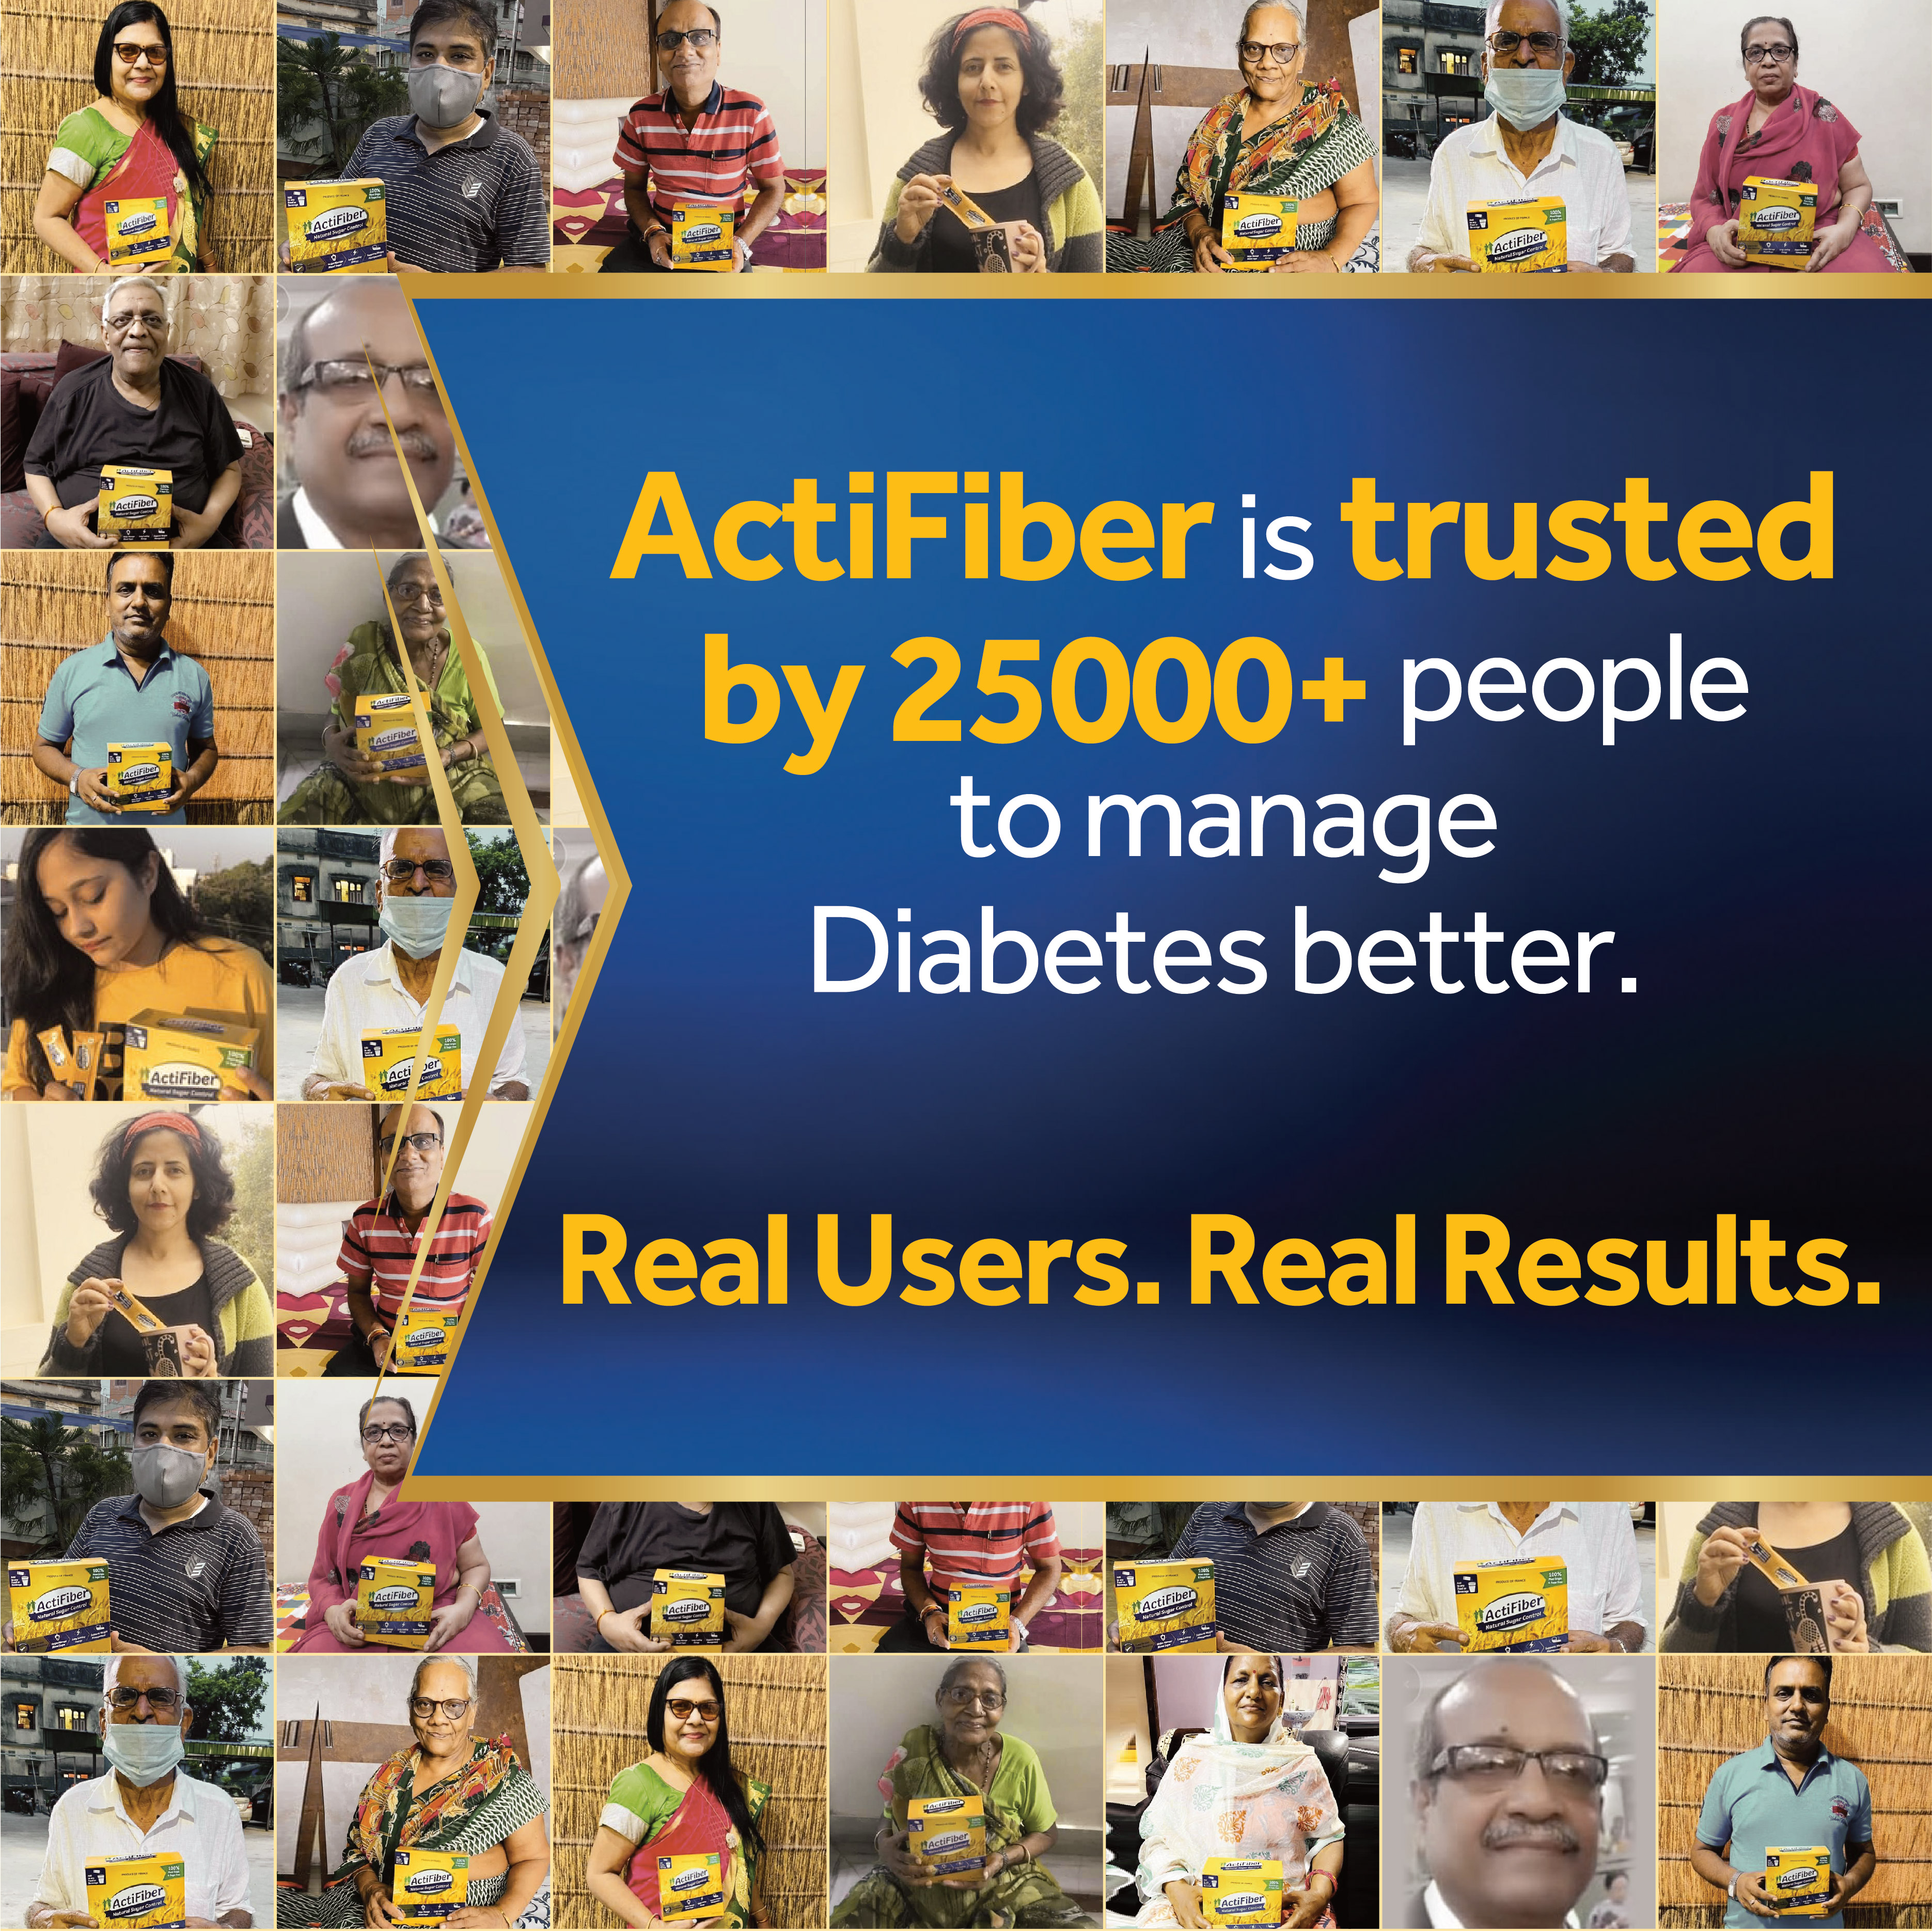 ActiFiber Trusted widely